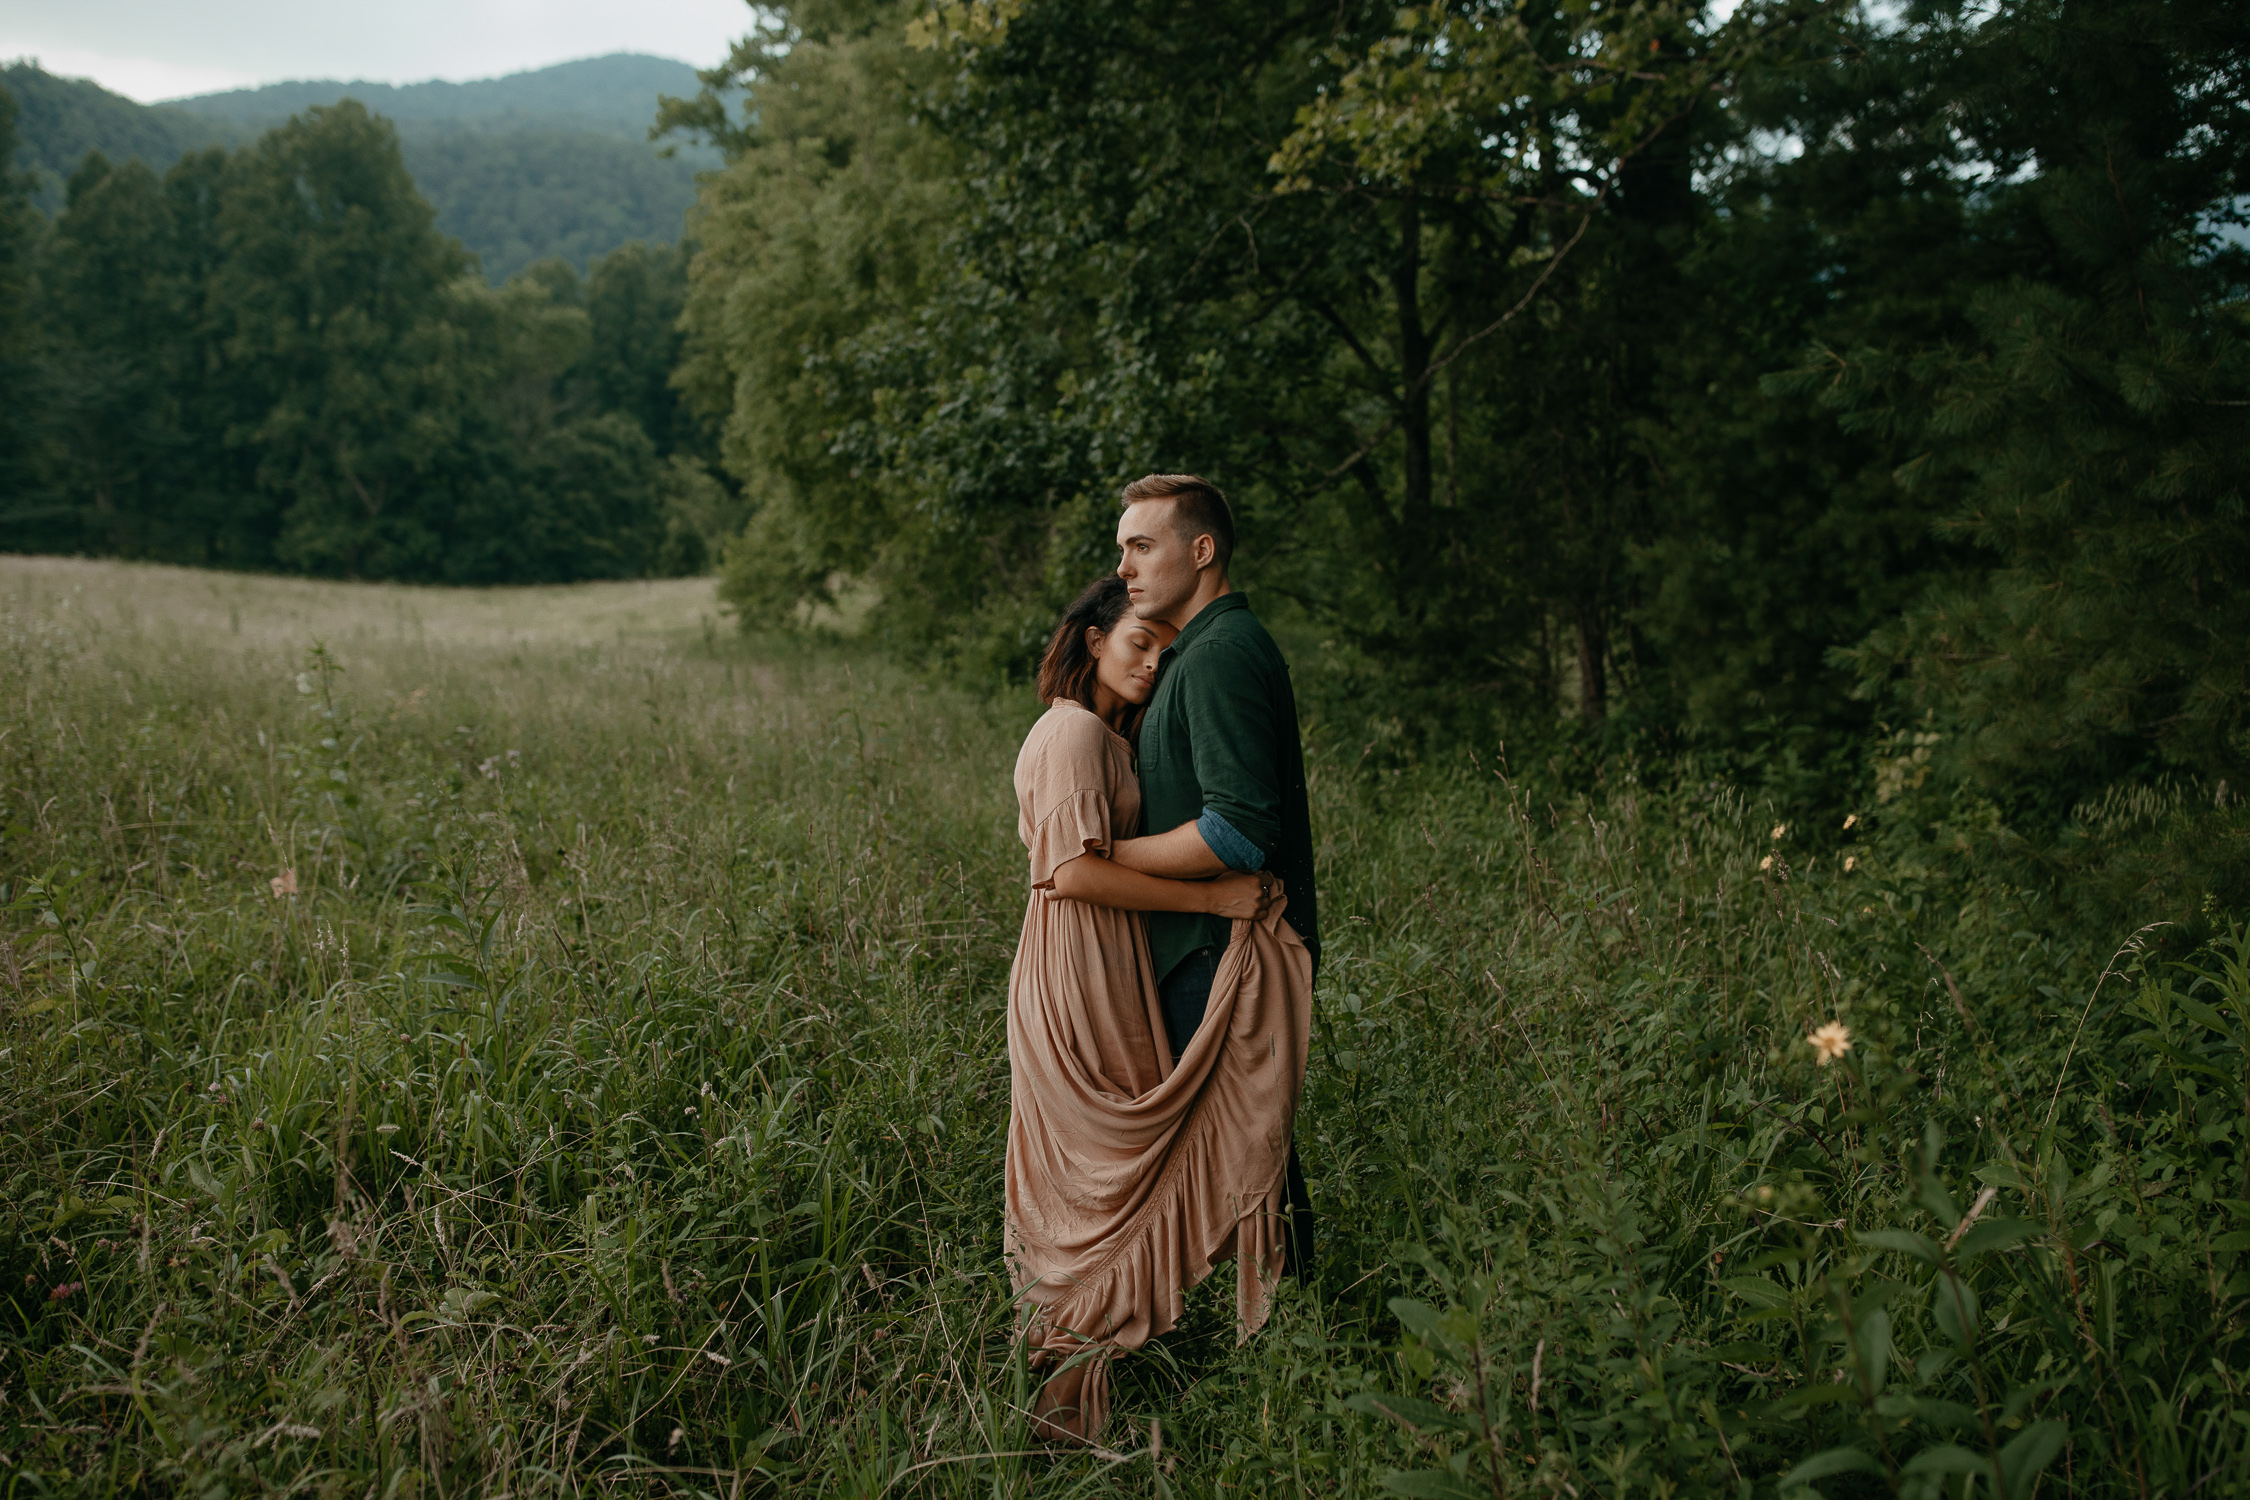 ariannamtorres and isaac engagement session at cades cove smoky mountains elopement-55.jpg